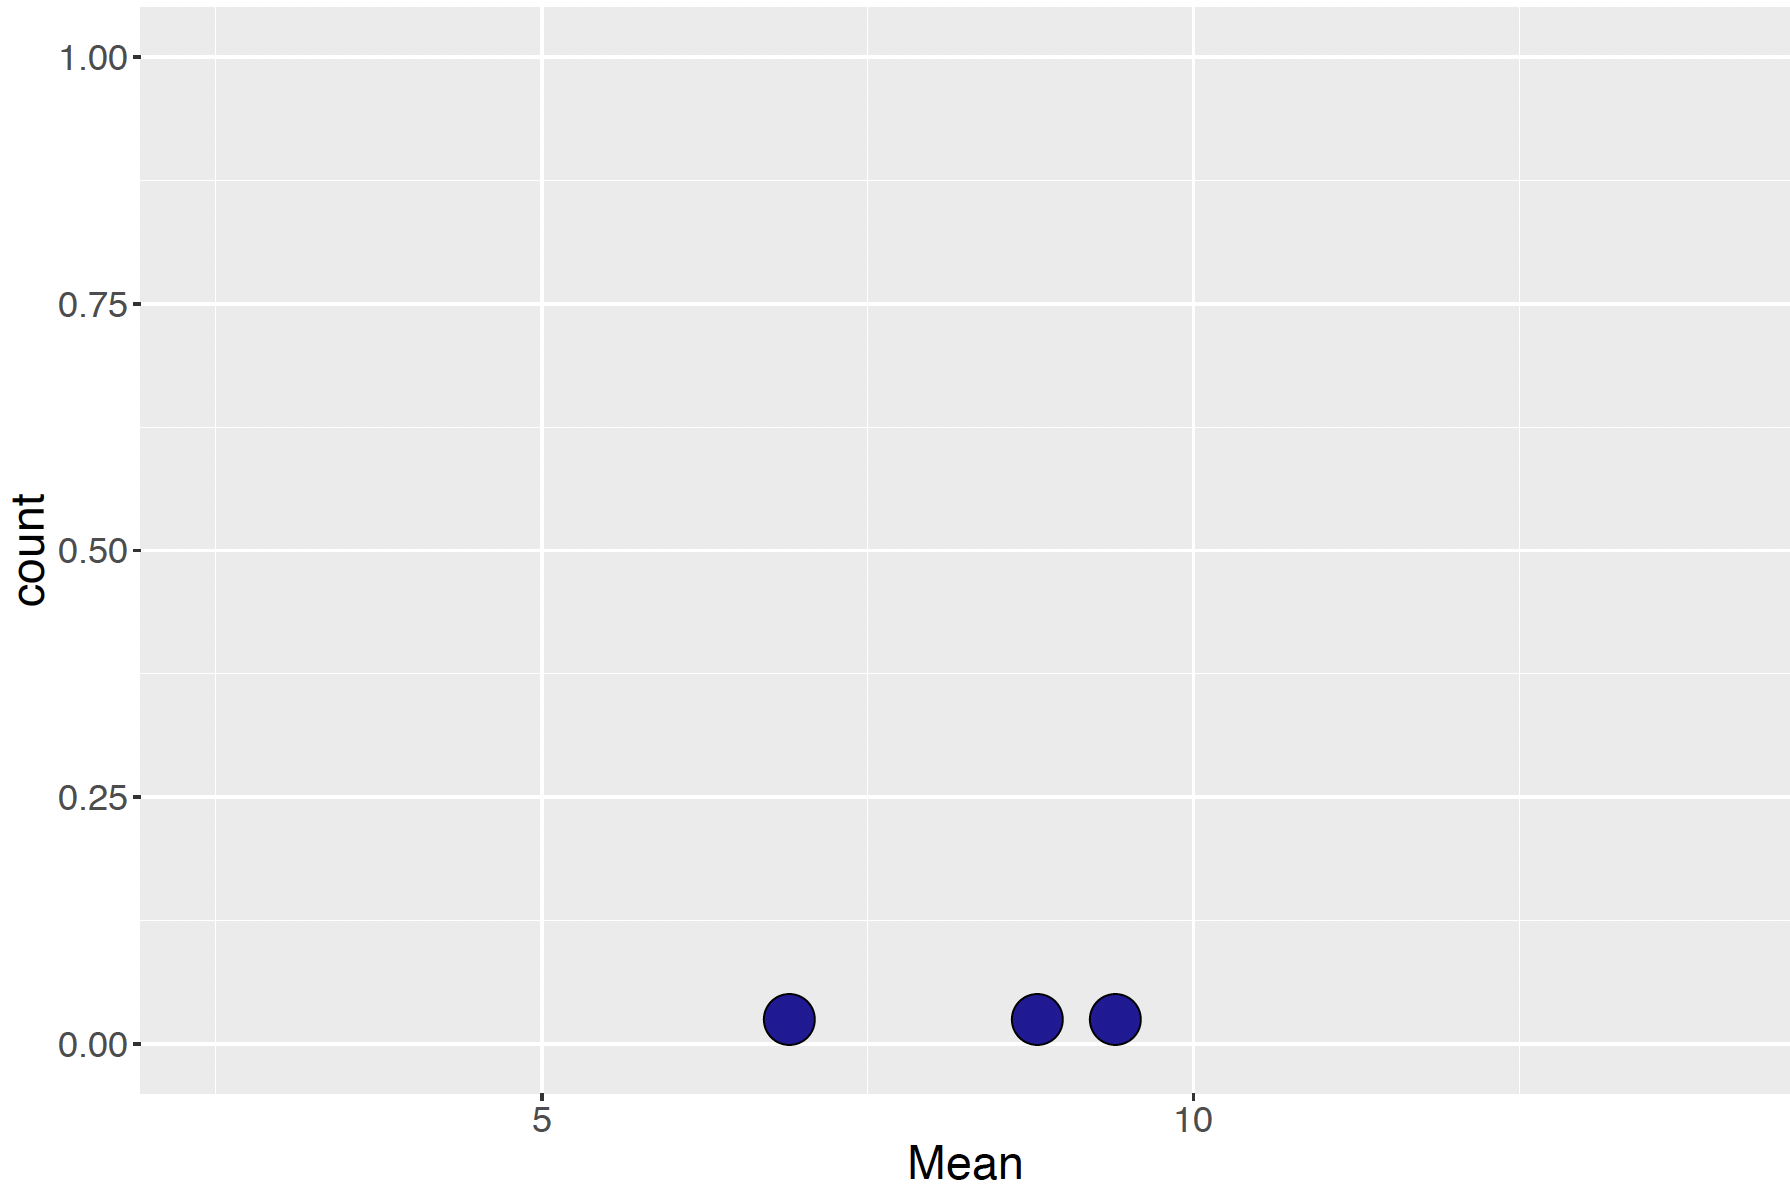 Graph of 3 sample means from 10 randomly selected candies.